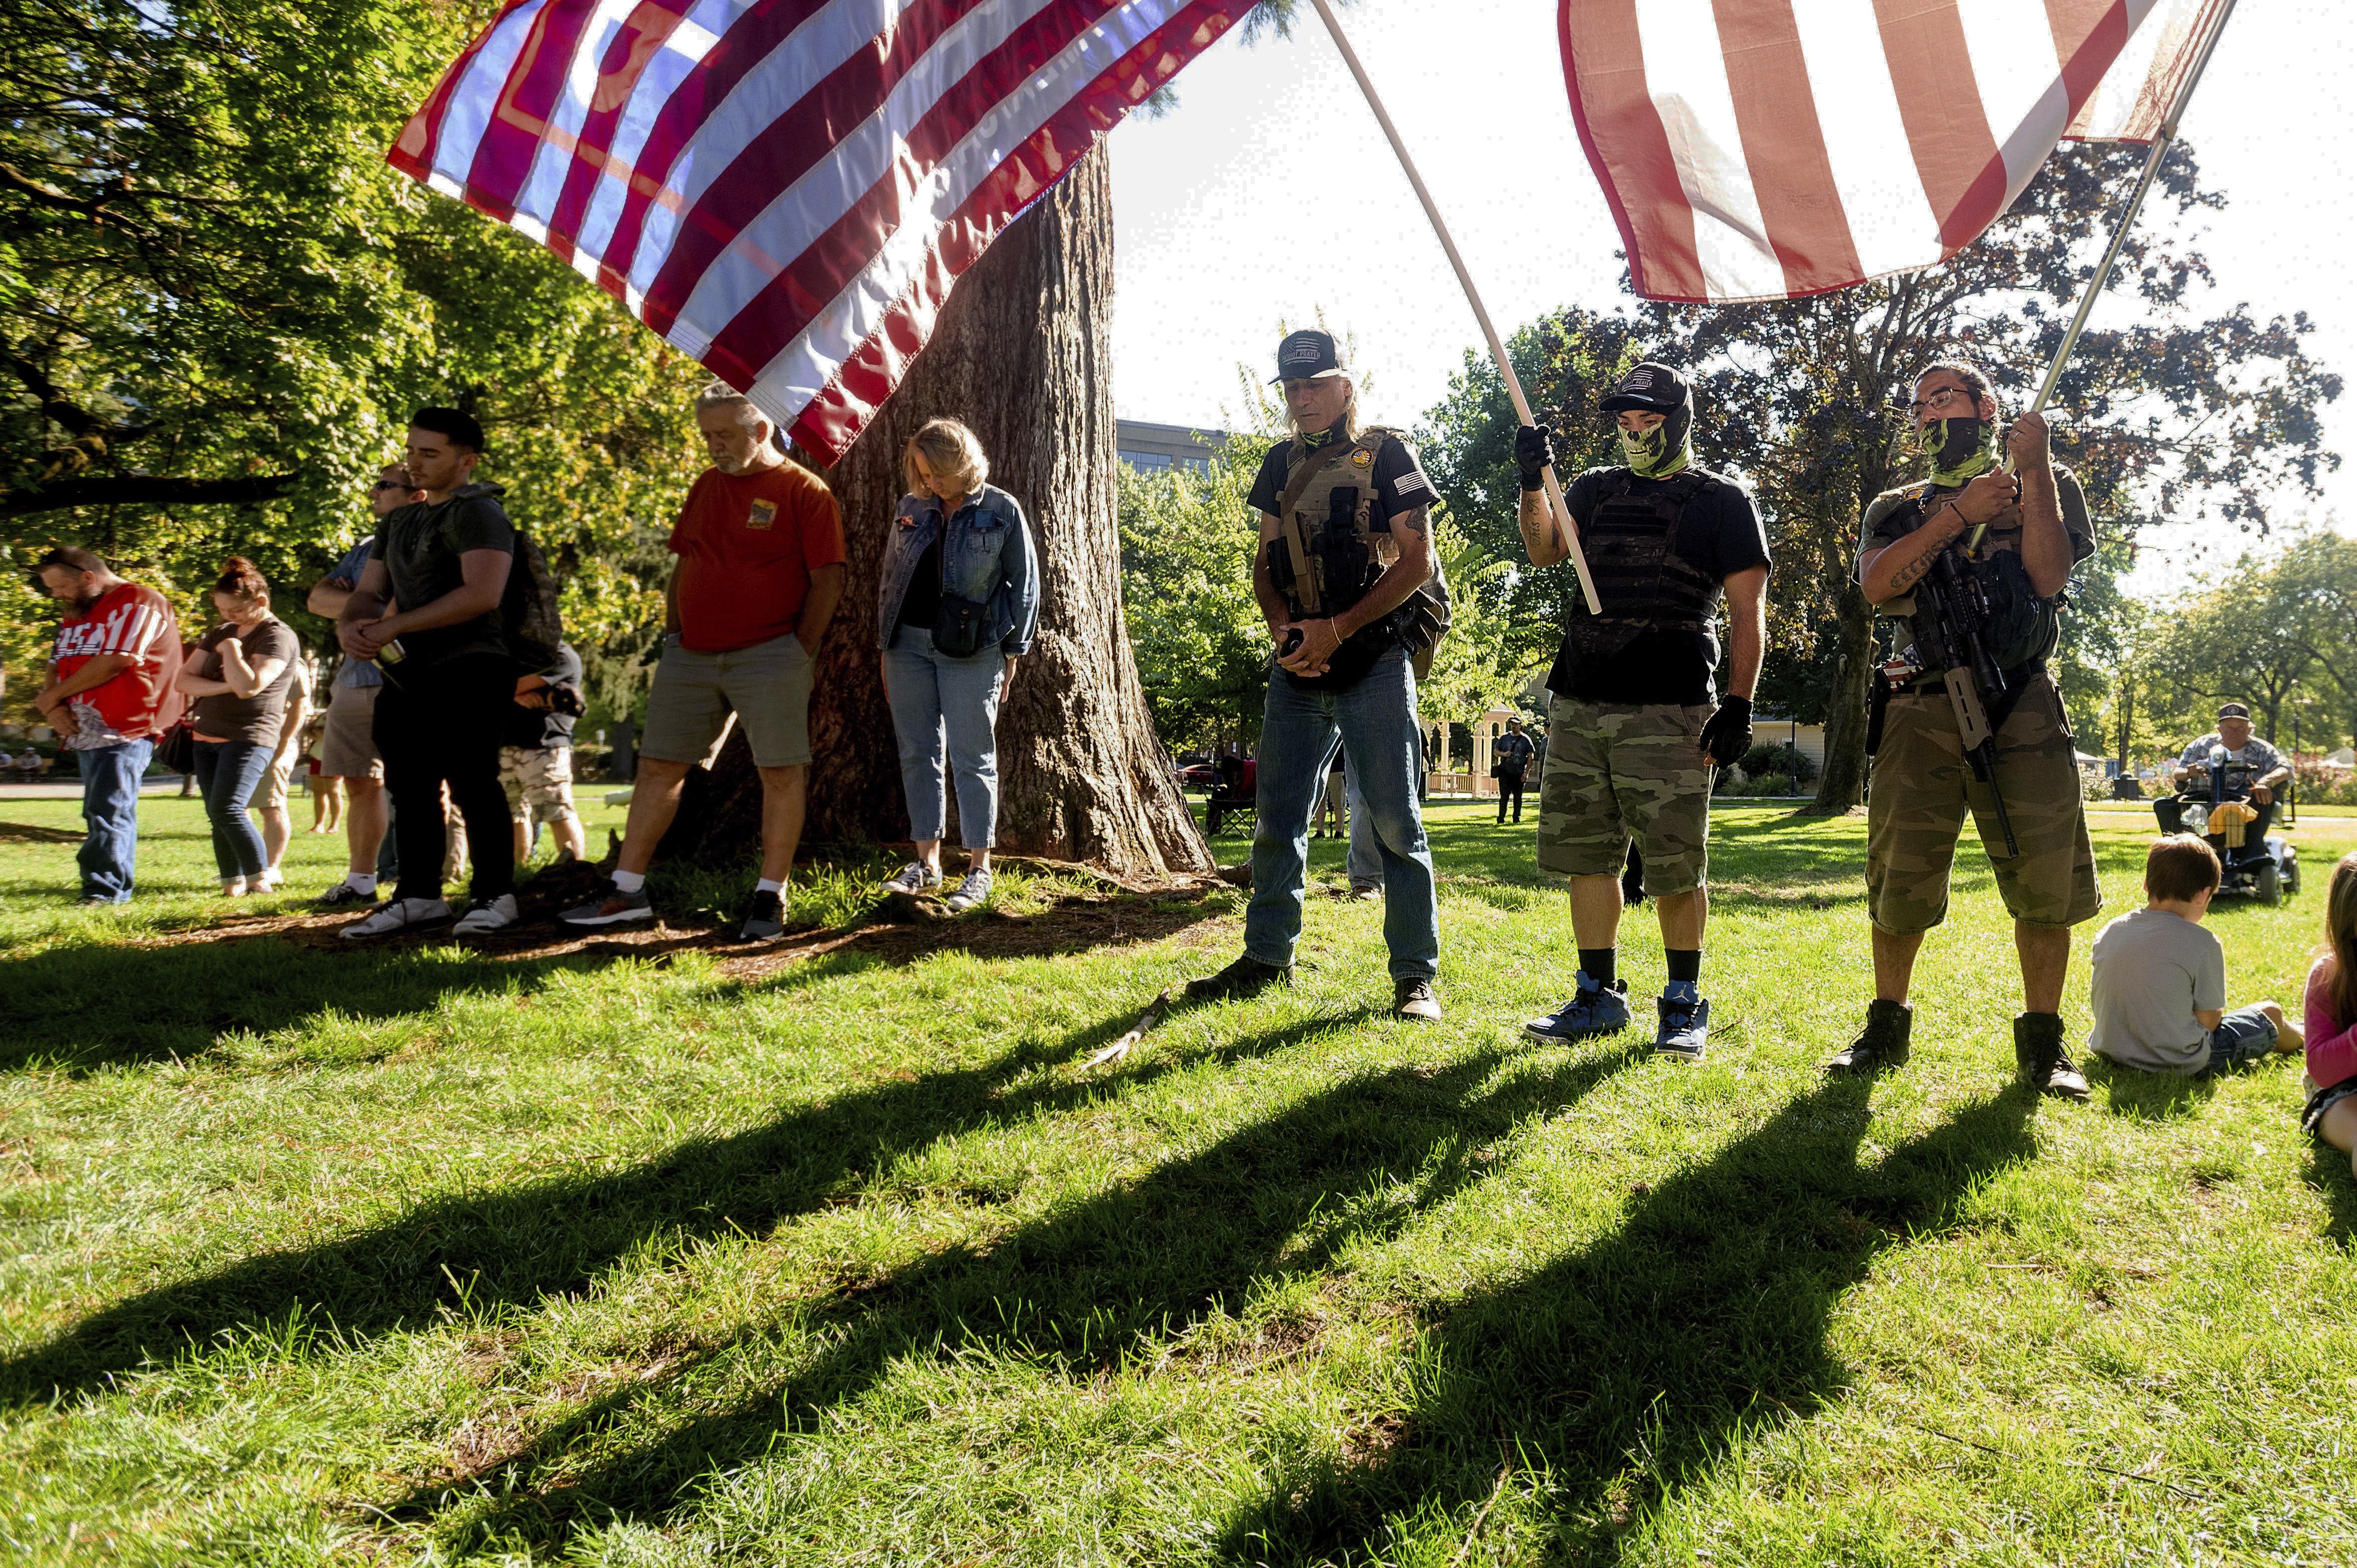 Mourners, who declined to give their names, listen to a prayer during a memorial for Aaron J. Danielson on Saturday, Sept. 5, 2020, in Vancouver, Wash. Danielson, a supporter of the conservative group Patriot Prayer, was fatally shot in August as supporters of President Donald Trump and Black Lives Matter protesters clashed in Portland, Ore. (AP Photo/Noah Berger)